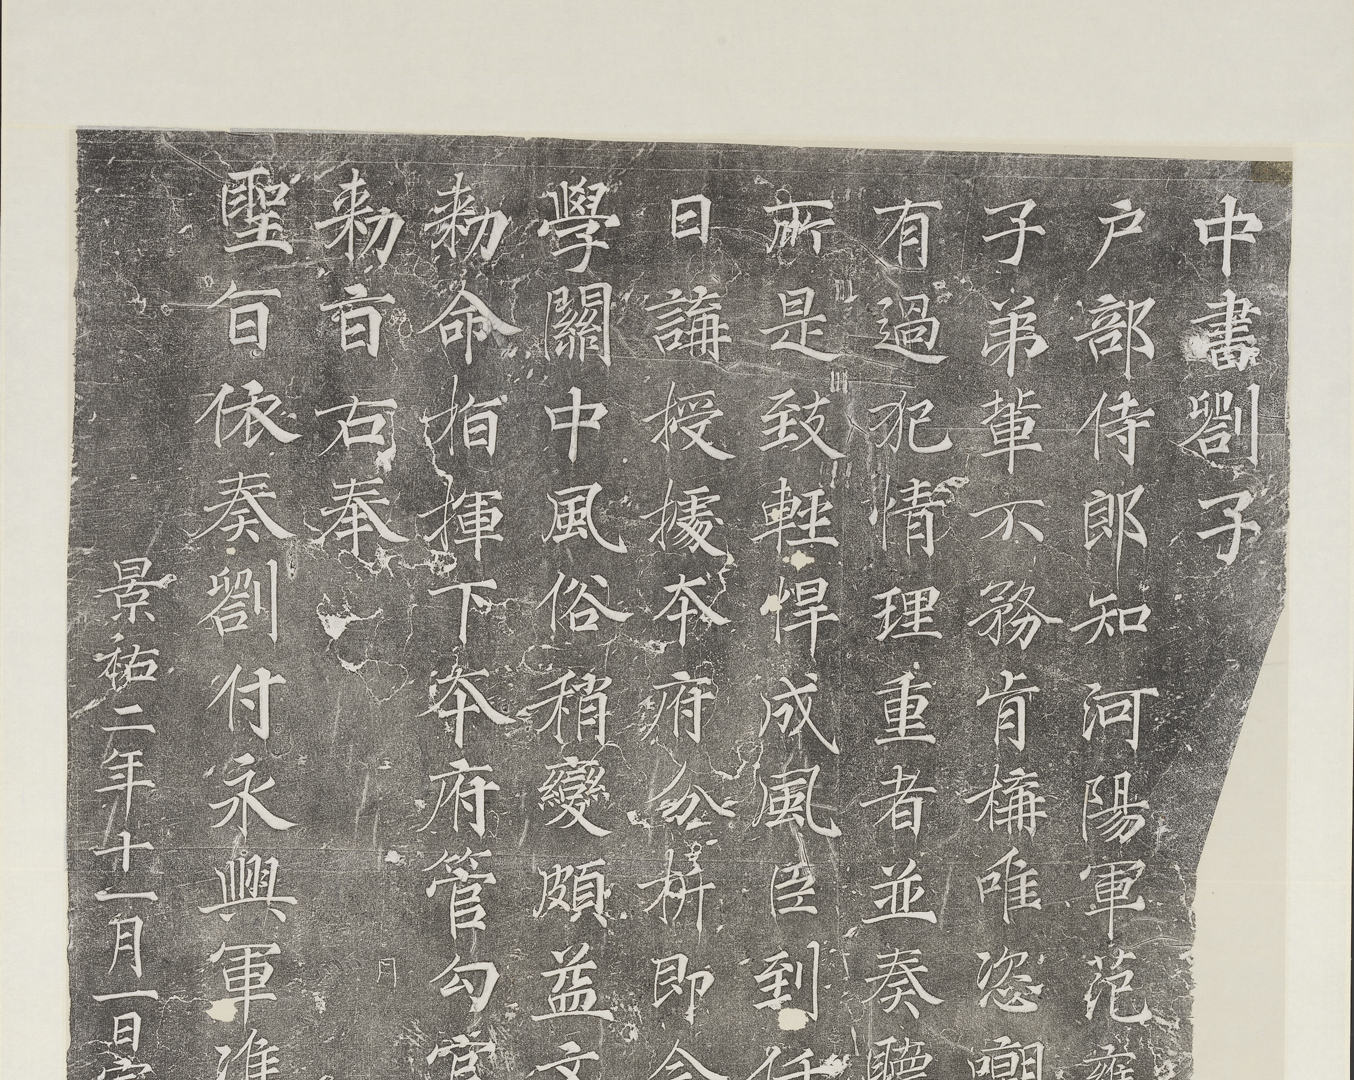 Ink Rubbing of the Stele on the Order from the Secretariat to the Yongxing Command in 1035